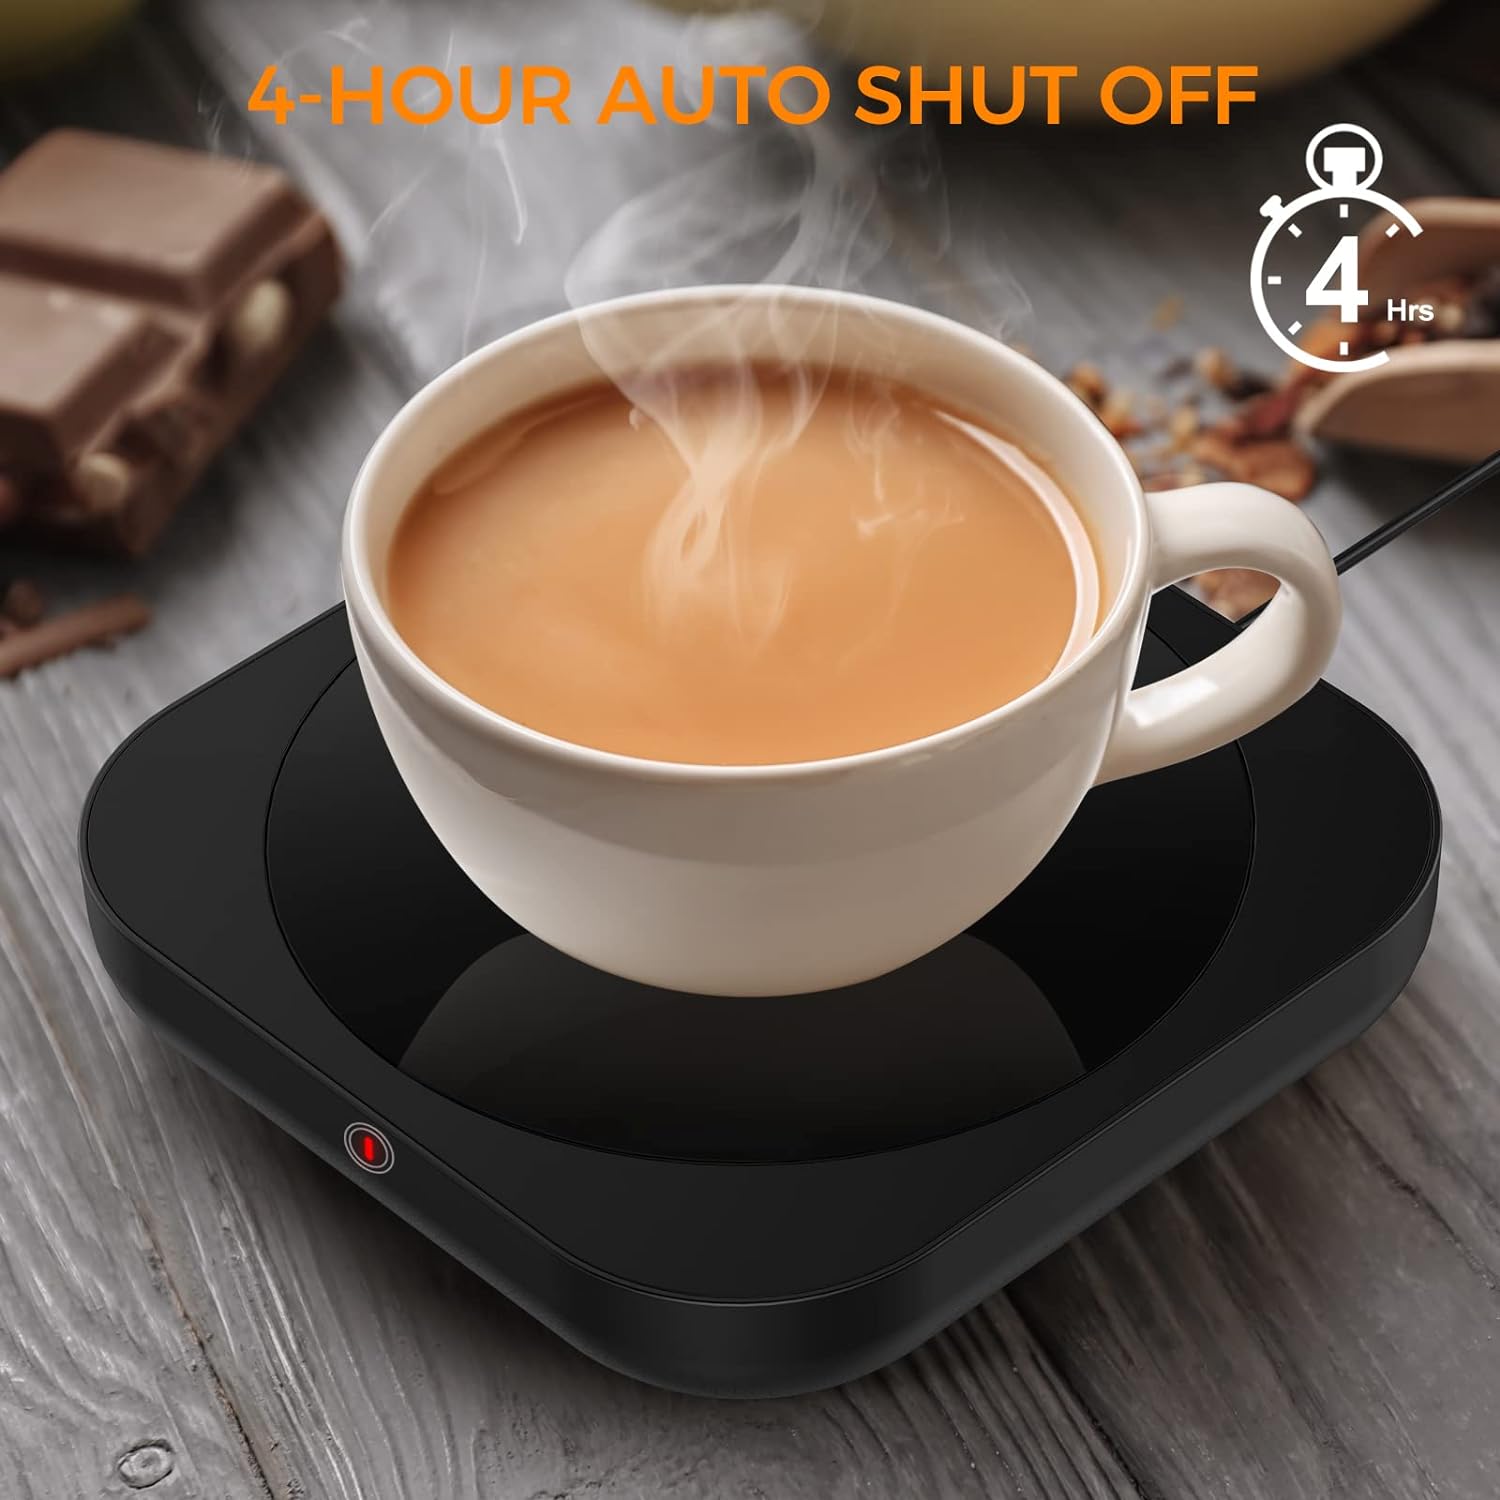 Coffee Mug Warmer for Desk, Coffee Warmer with 3 Temperature Settings, Coffee Cup Warmer for Desk Auto Shut Off, Waterproof Coffee Warmer for Desk with Touch Tech  Enlarged Heating Plate, Best Gift